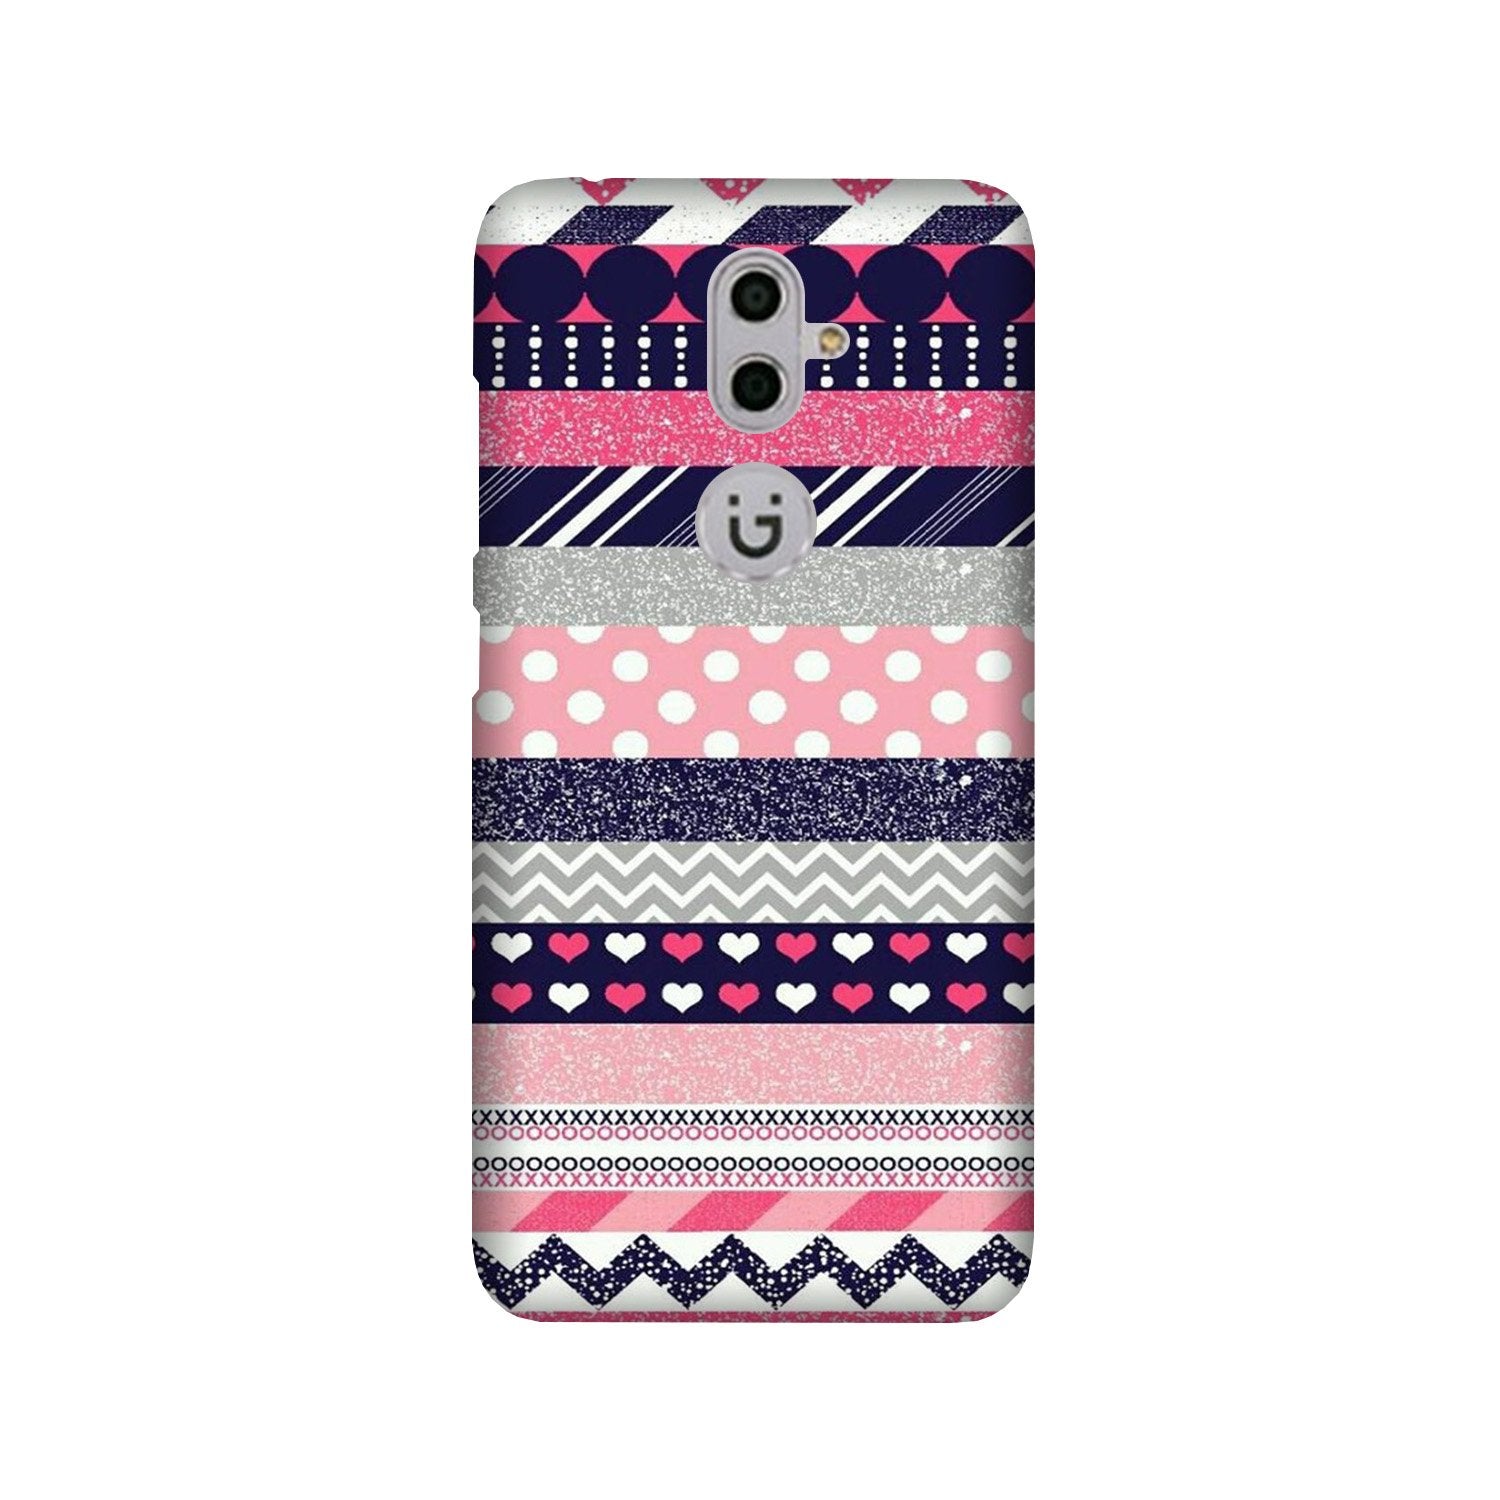 Pattern3 Case for Gionee S9